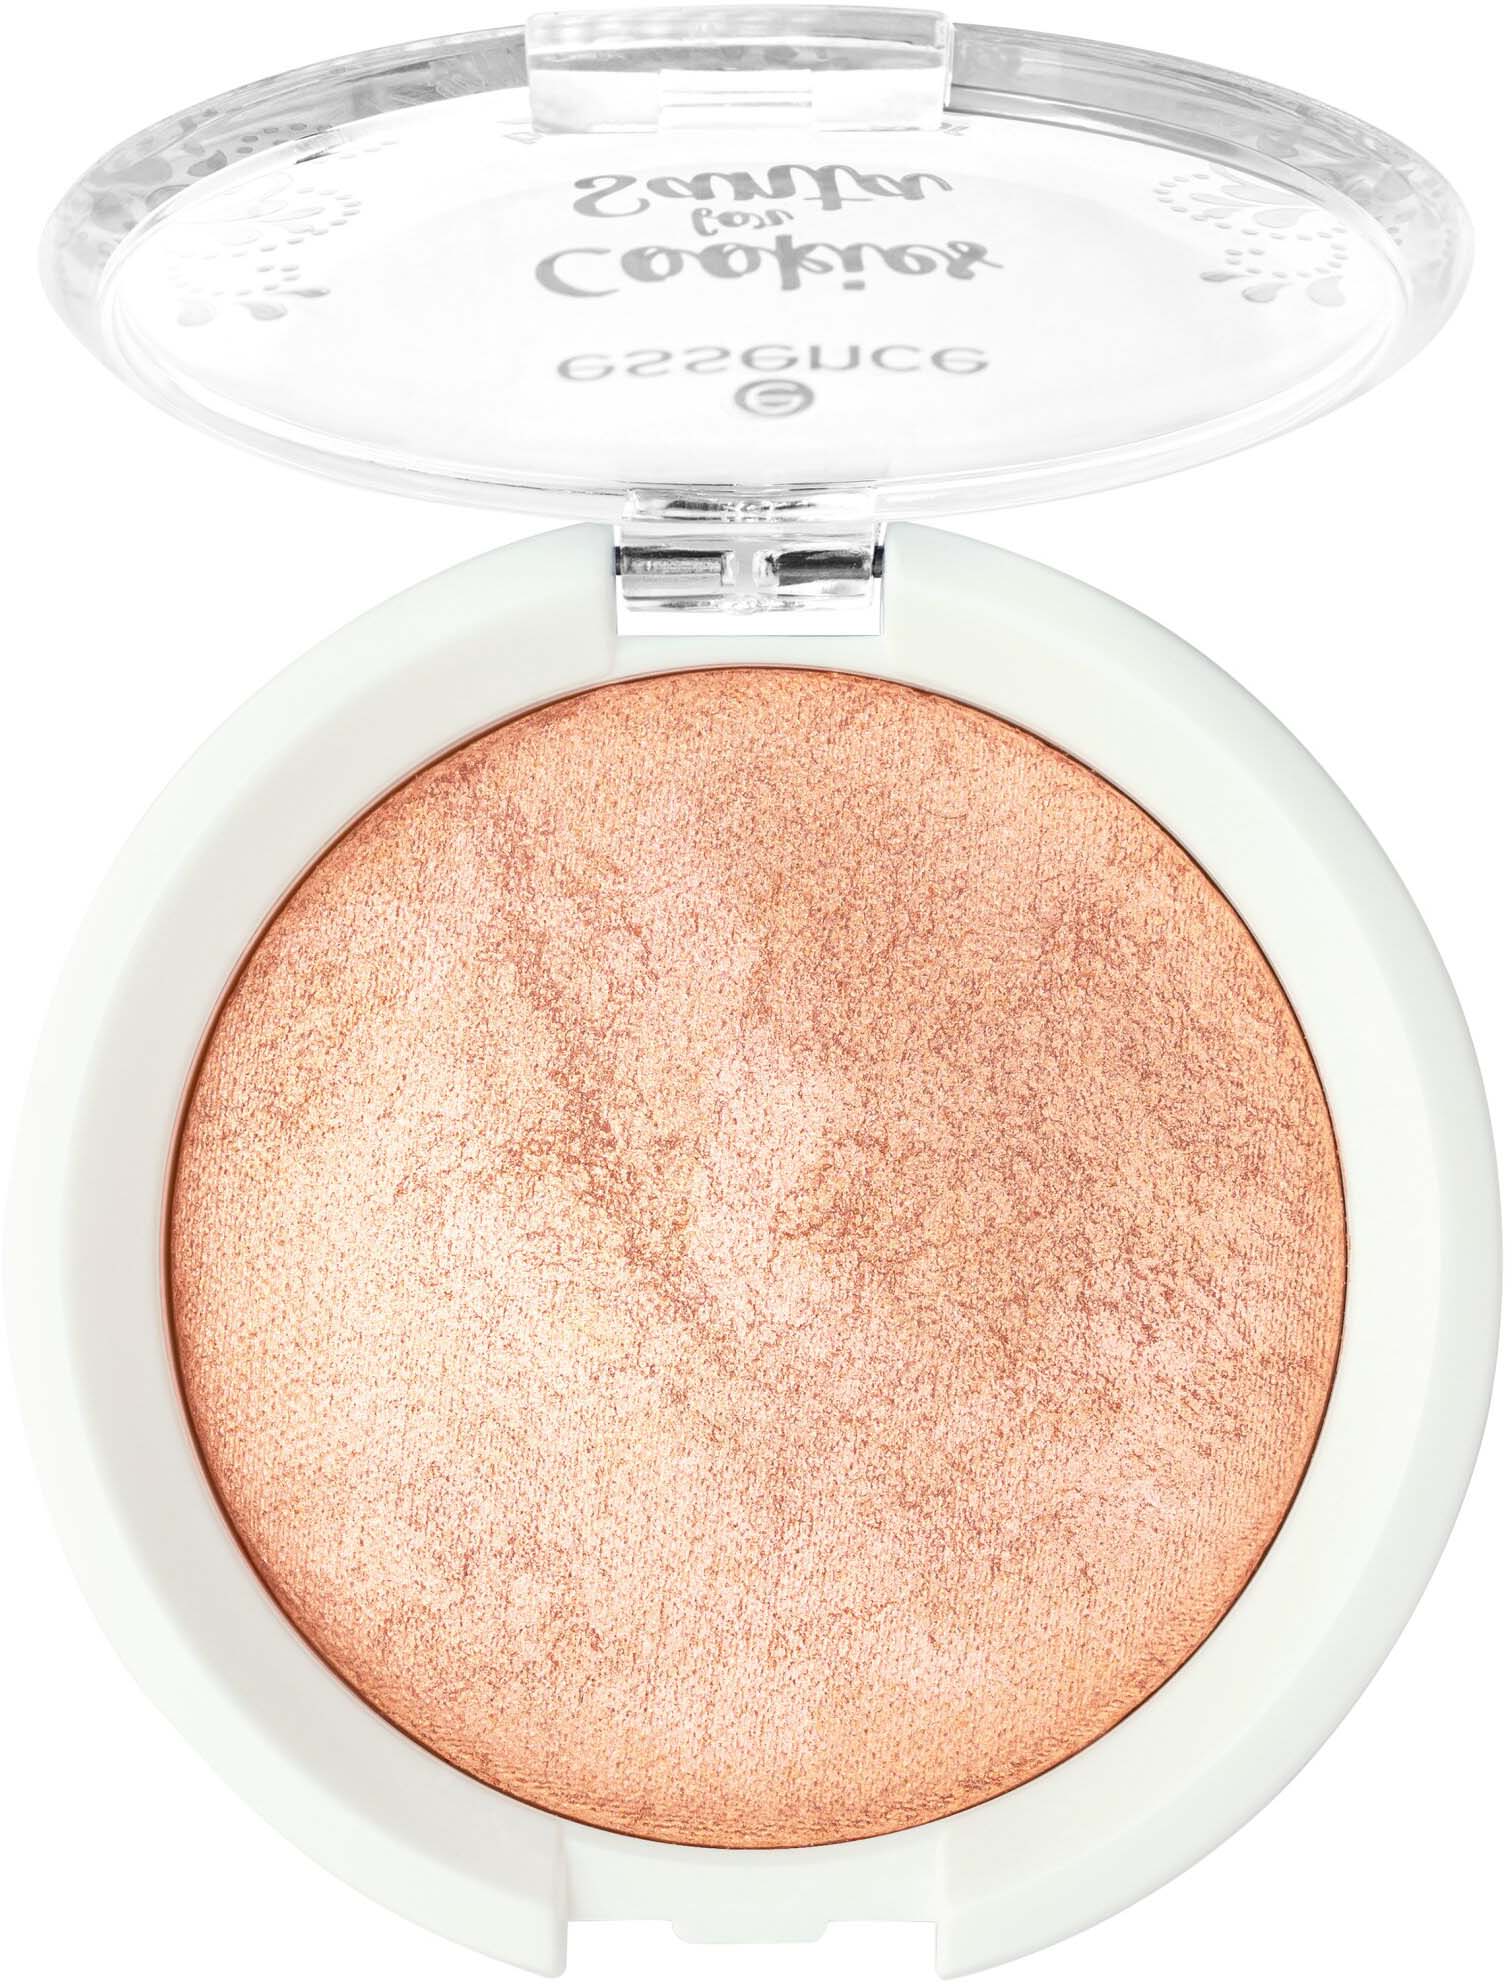 essence Cookies Santa for Highlighter Baked